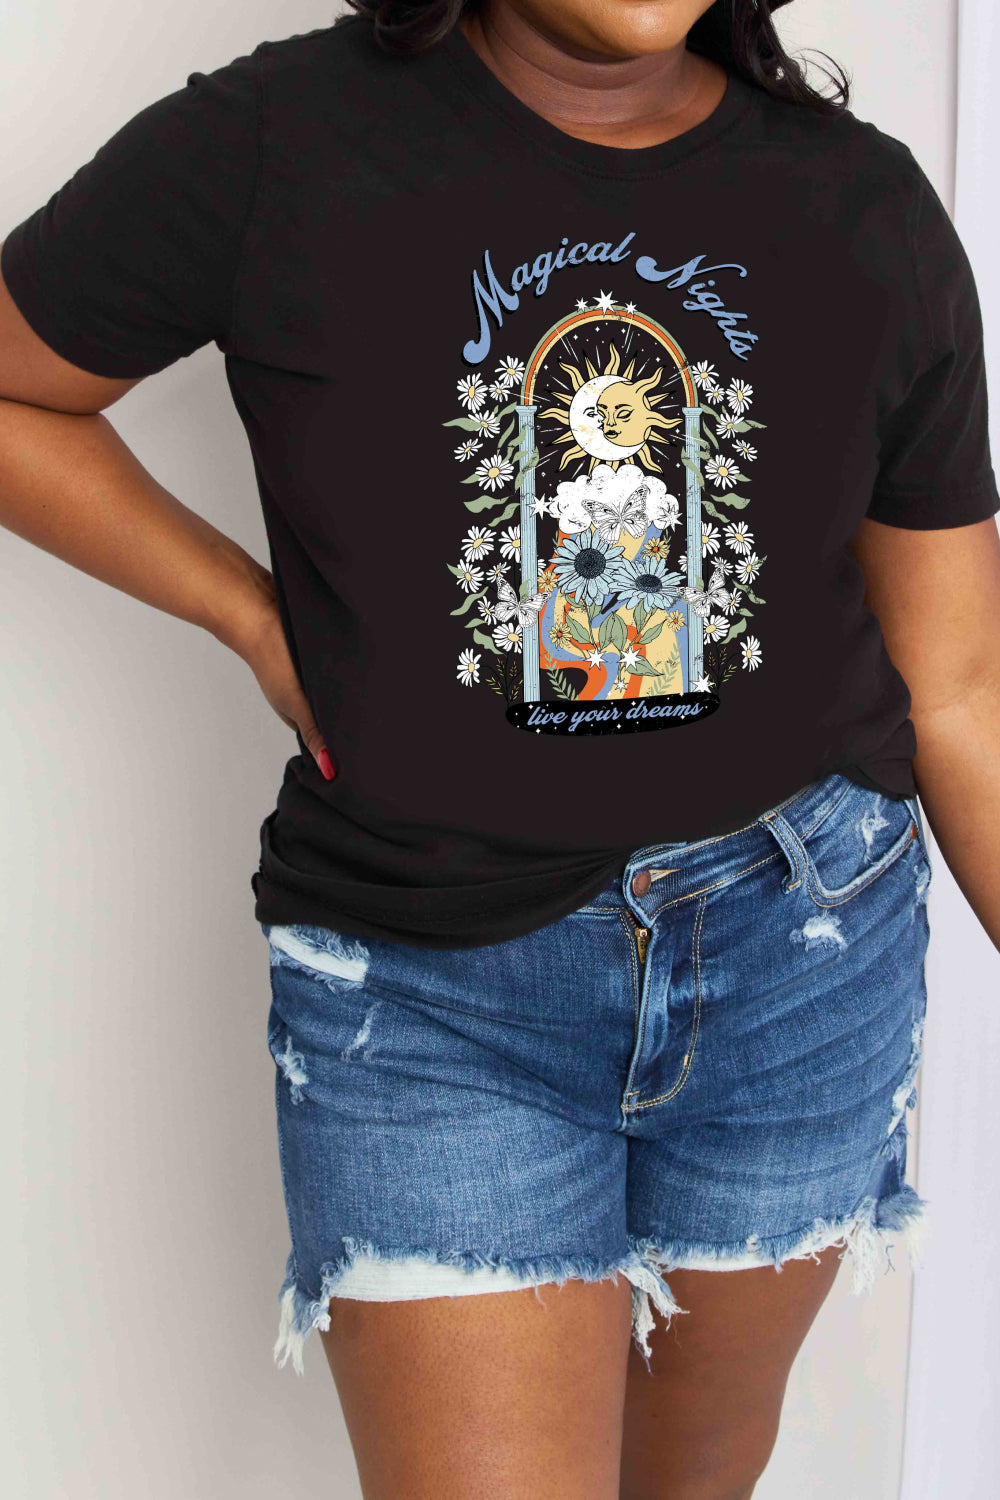 Full Size MAGICAL NIGHTS LIVE YOUR DREAMS Graphic Cotton Tee